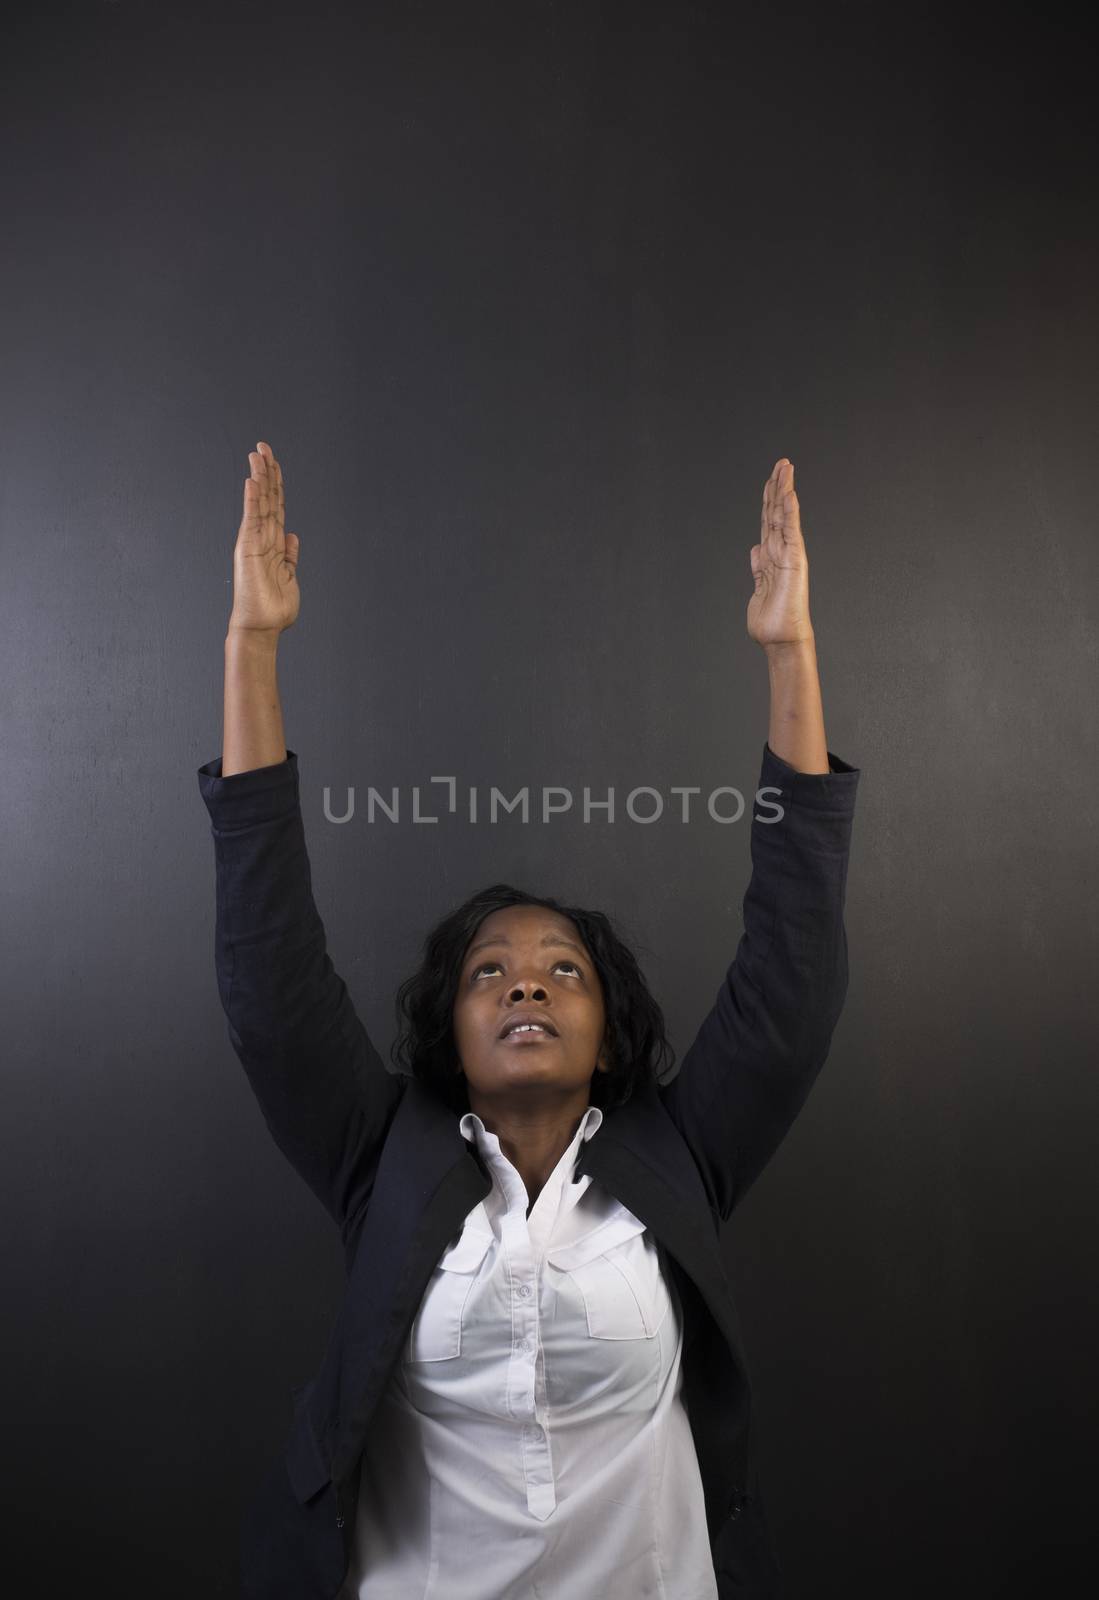 South African or African American woman teacher or student reaching for the sky on black background